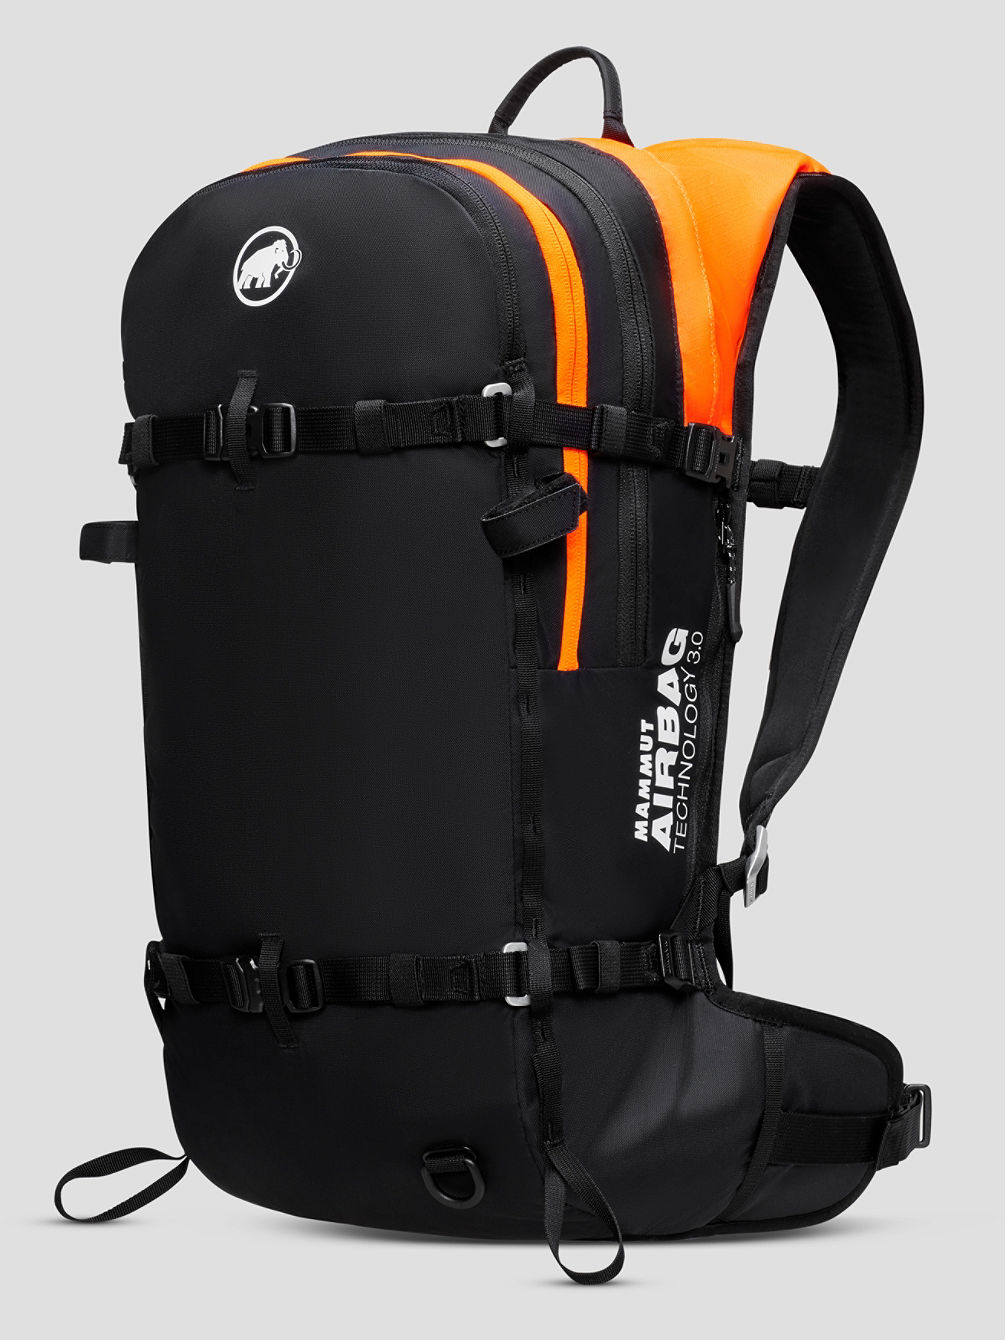 Free 22 Removable Airbag 3.0 Sac &agrave; dos